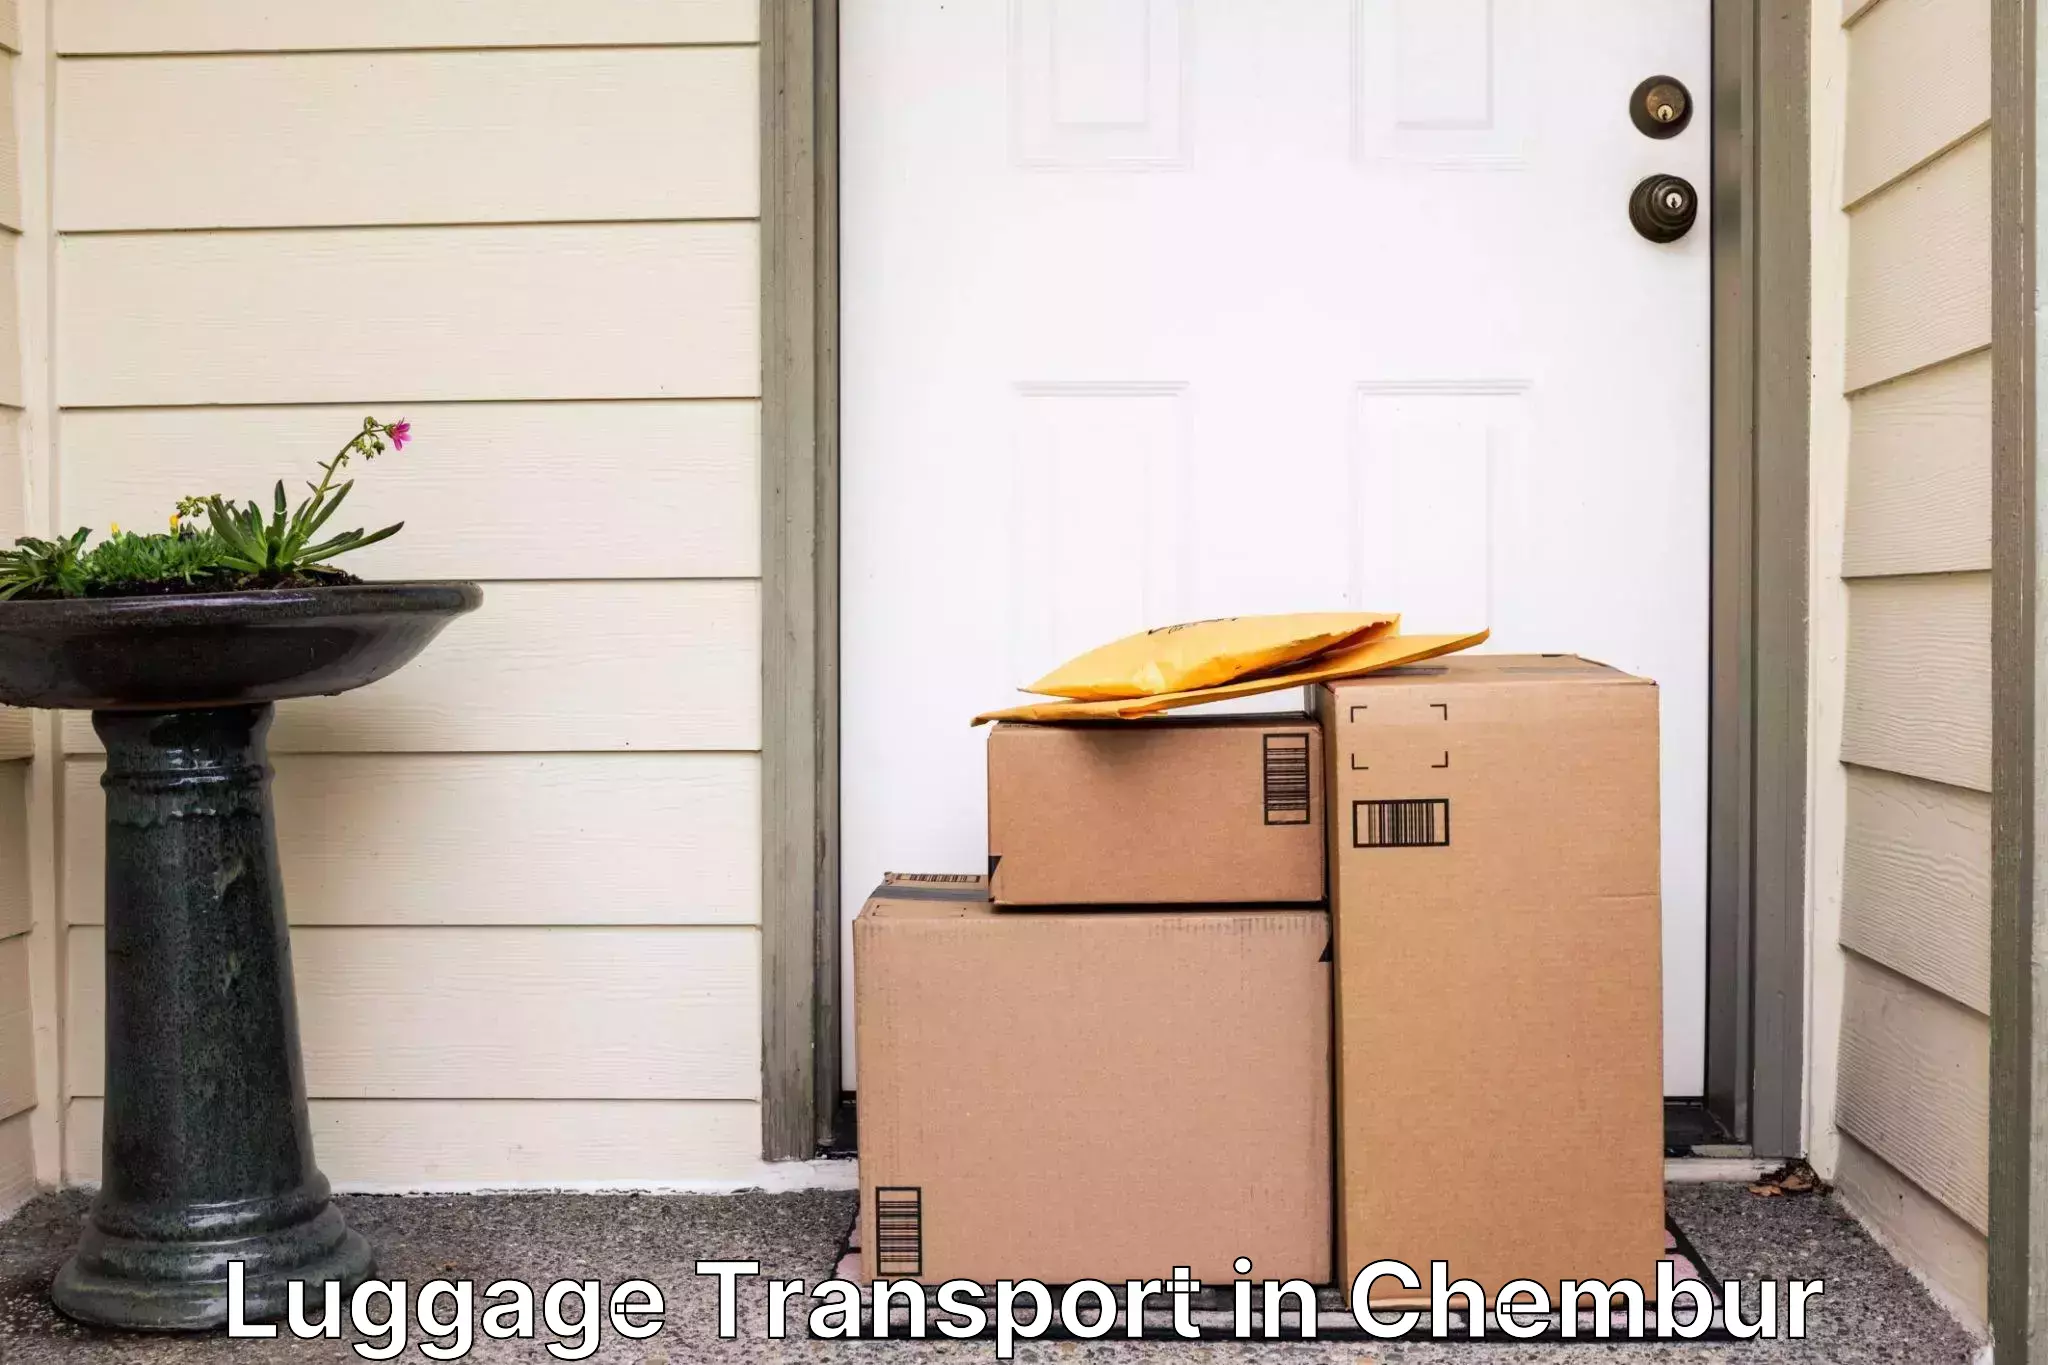 Online luggage shipping in Chembur